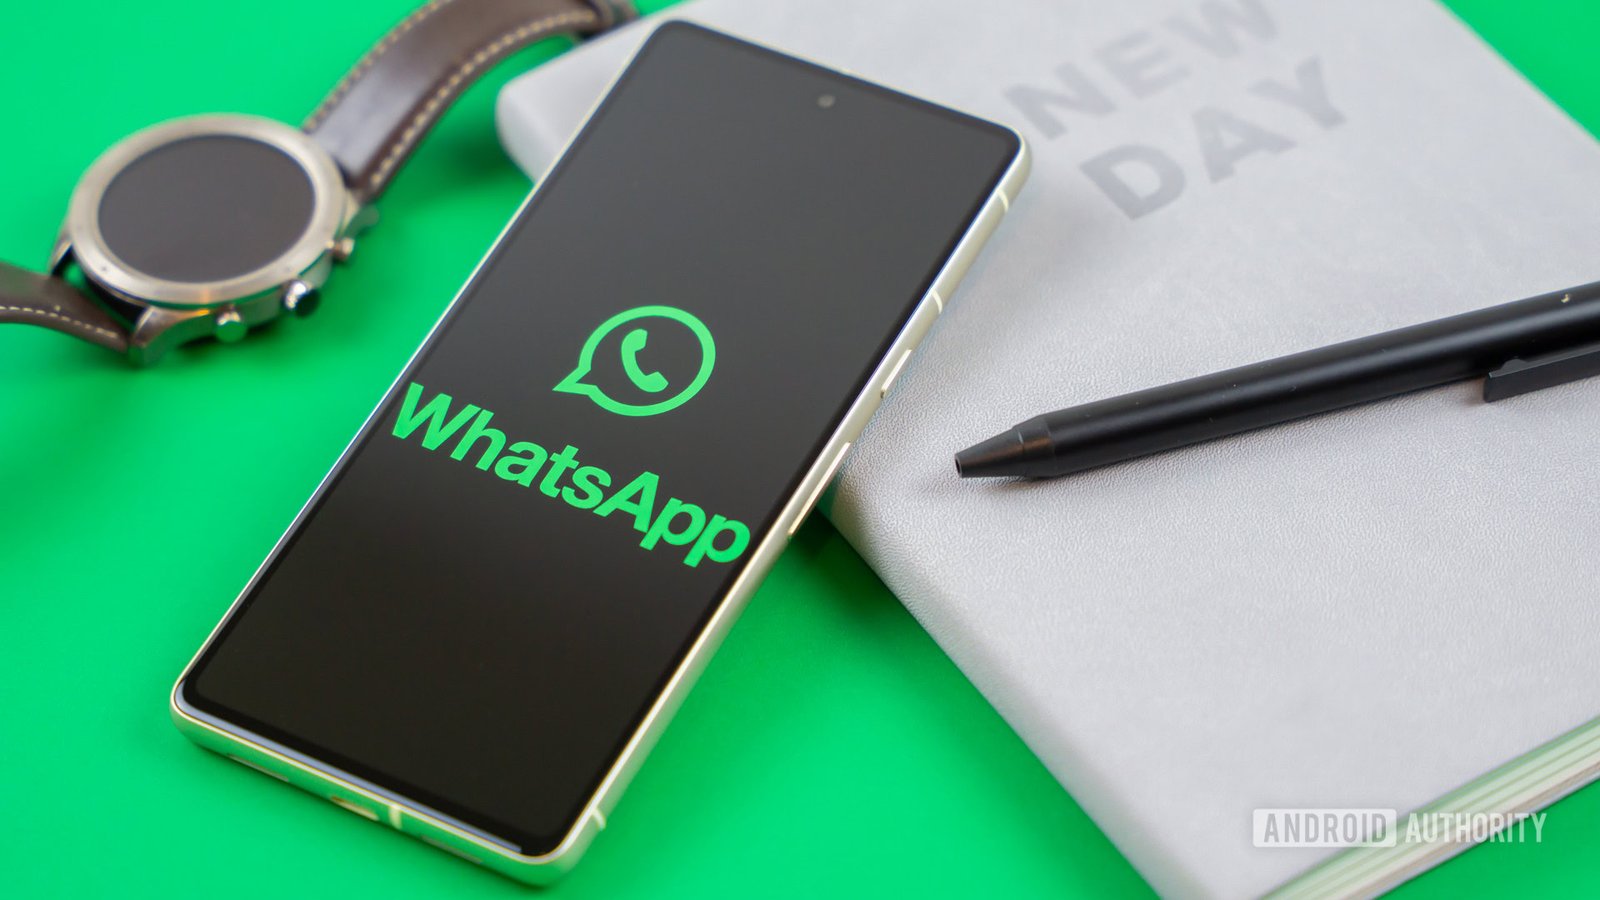 WhatsApp rolls out an in-app dialer to beta testers